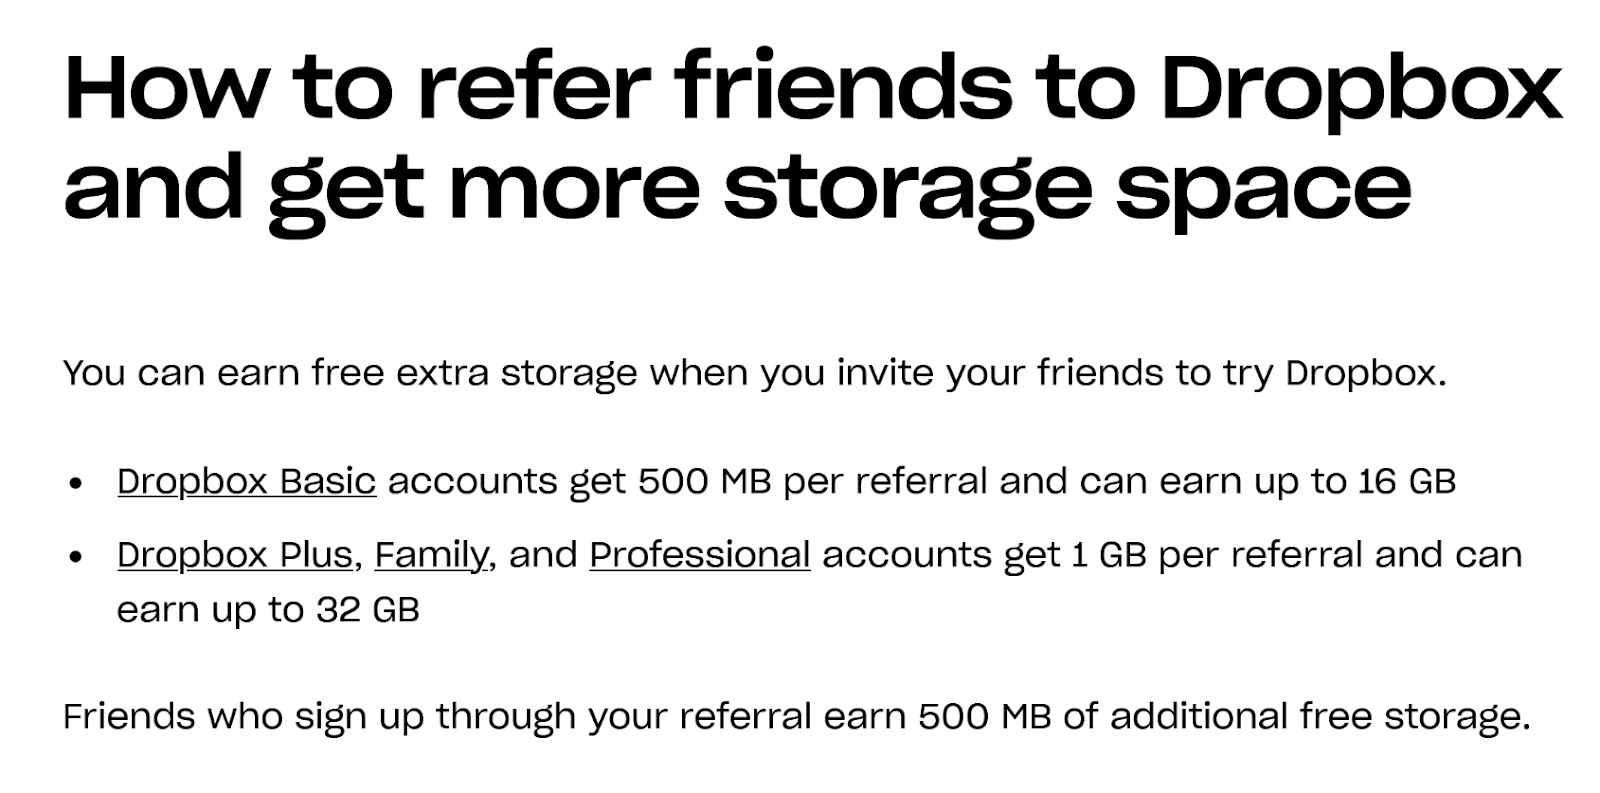 "How to refer friends to Dropbox and get more storage space" message